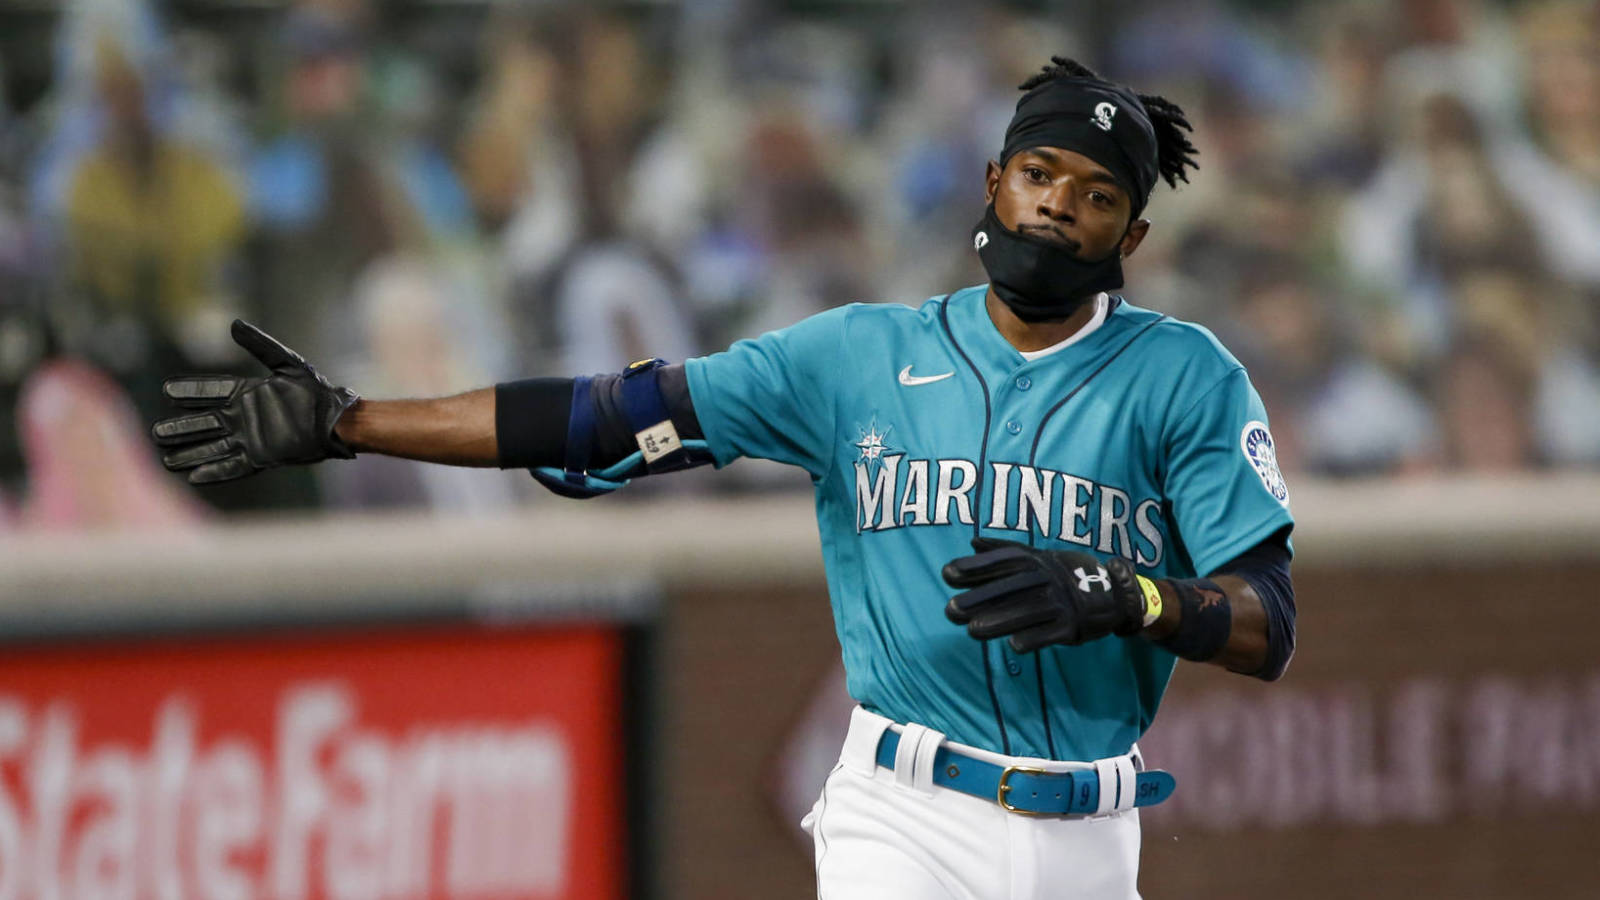 Dee Gordon shows off his hops before Mariners game